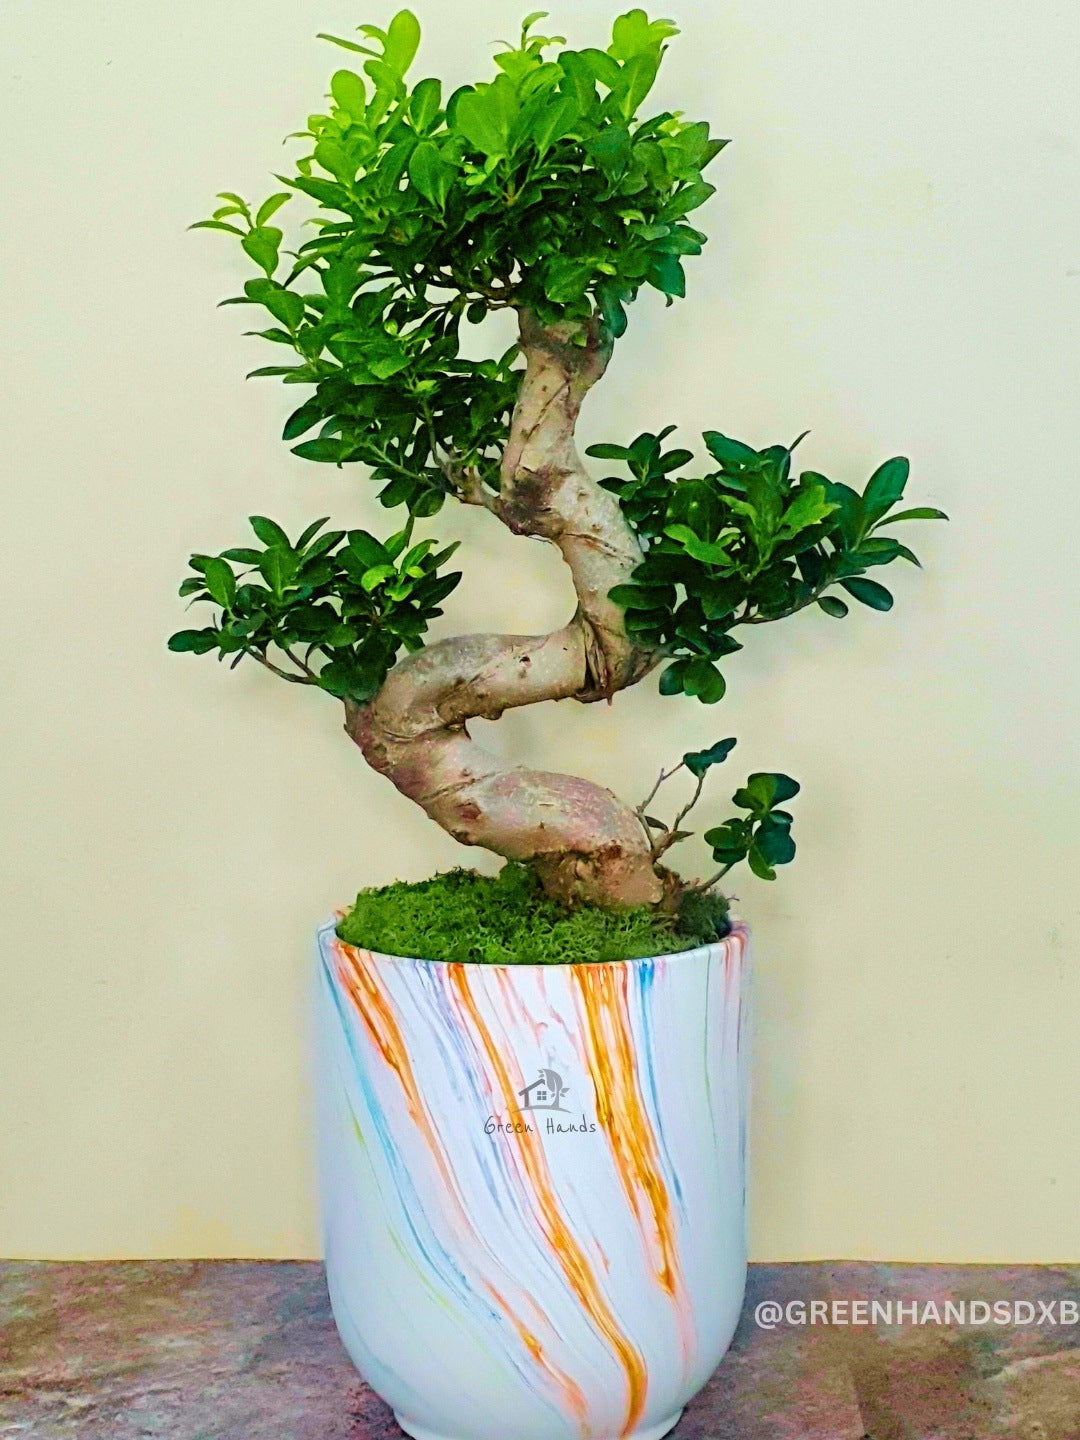 Potted S Bonsai Tree Planted in Rainbow Symphony Pot with Pebbles Topping